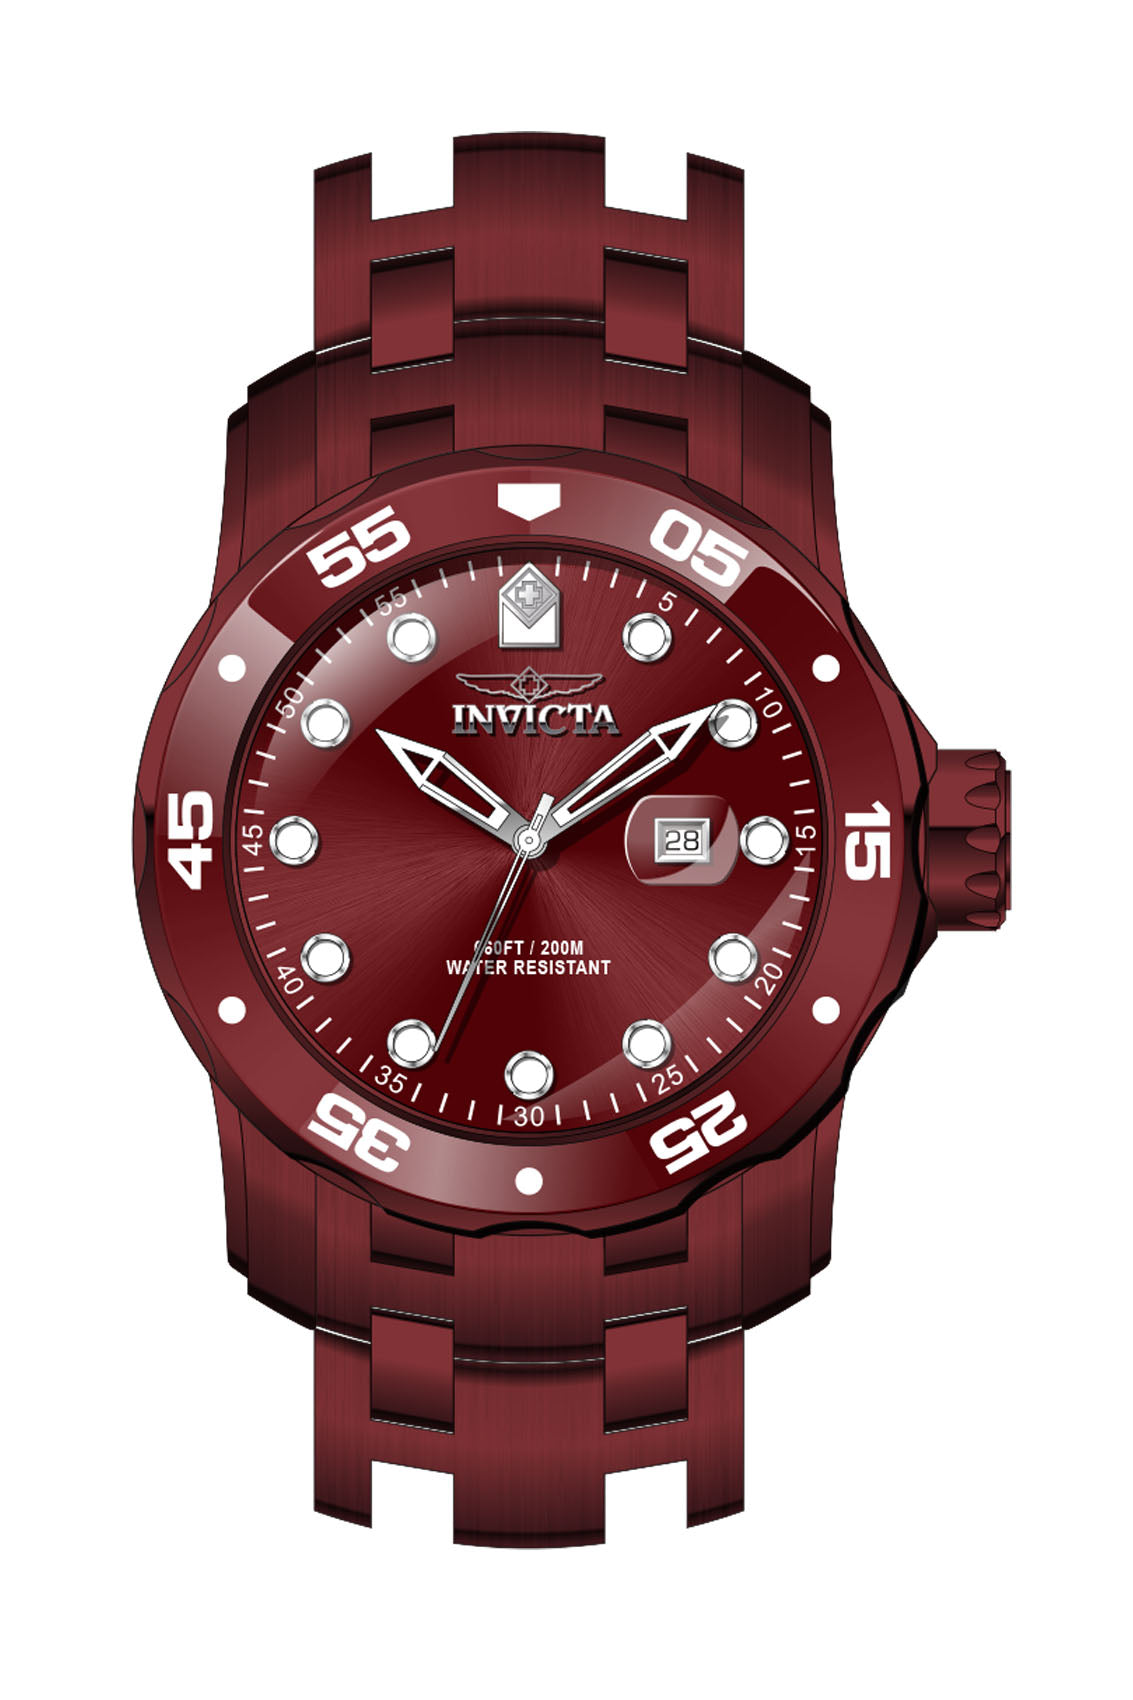 title:Invicta Men's IN-40836 48mm Red Dial Quartz Watch;color:Red